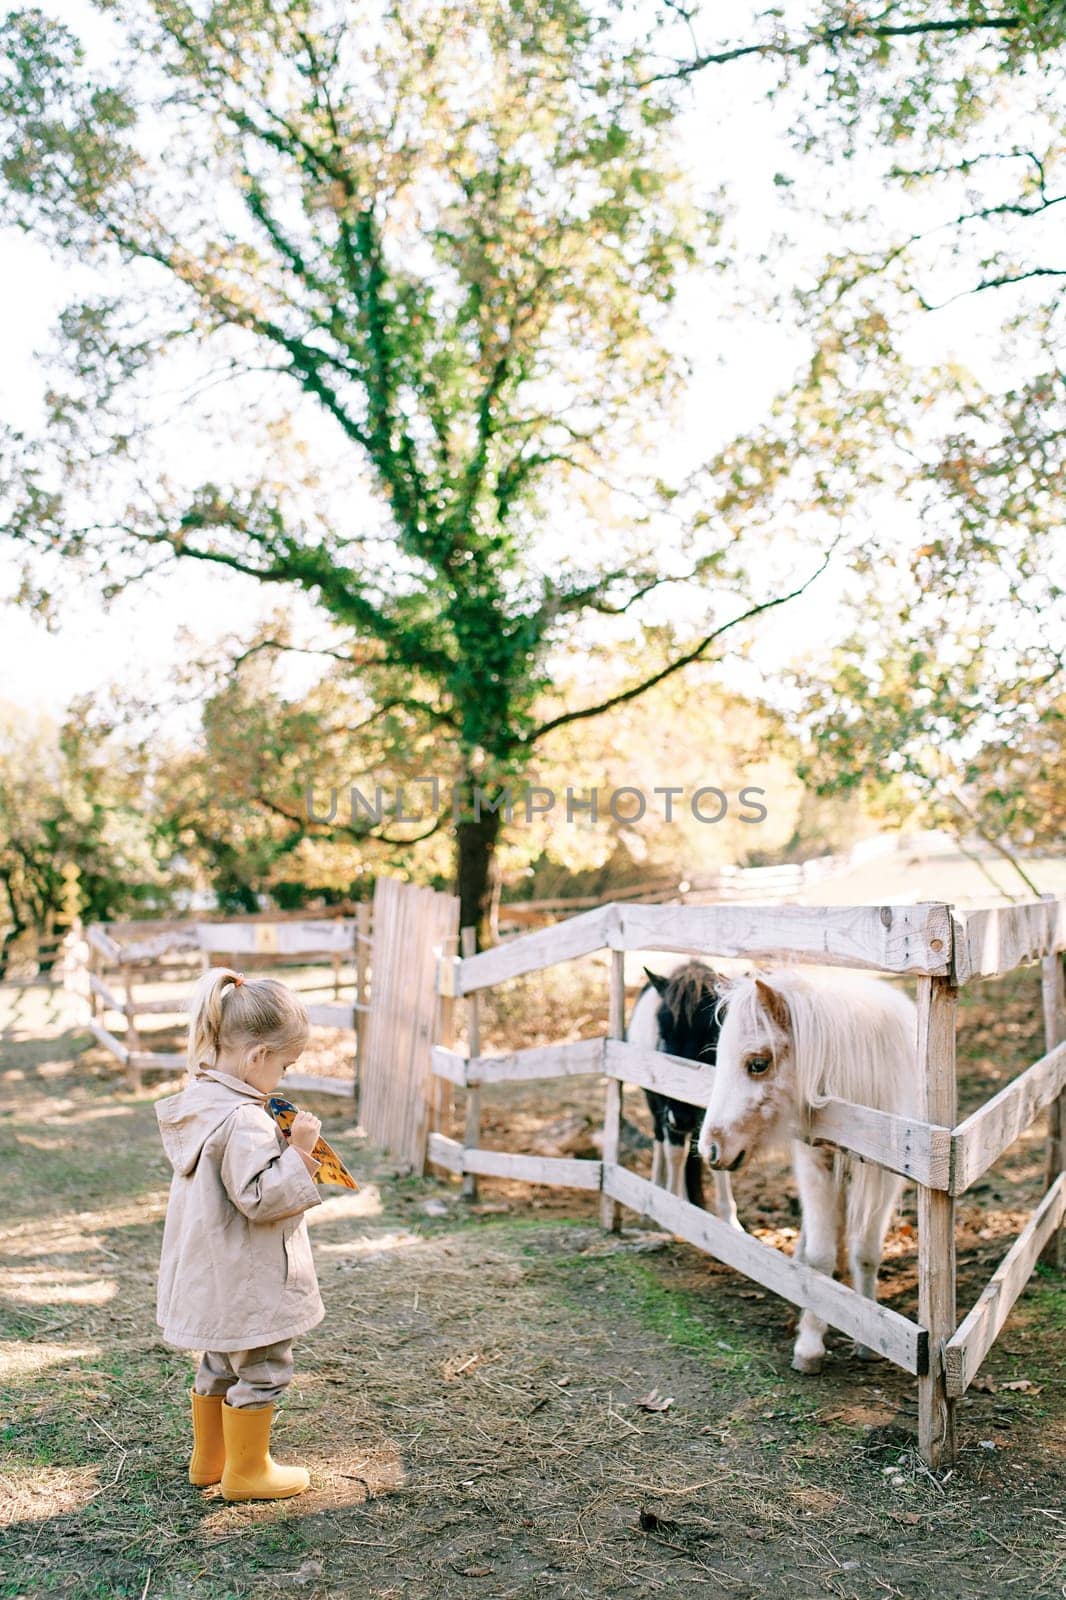 Little girl shows a picture book to a pony peeking out from behind a fence by Nadtochiy